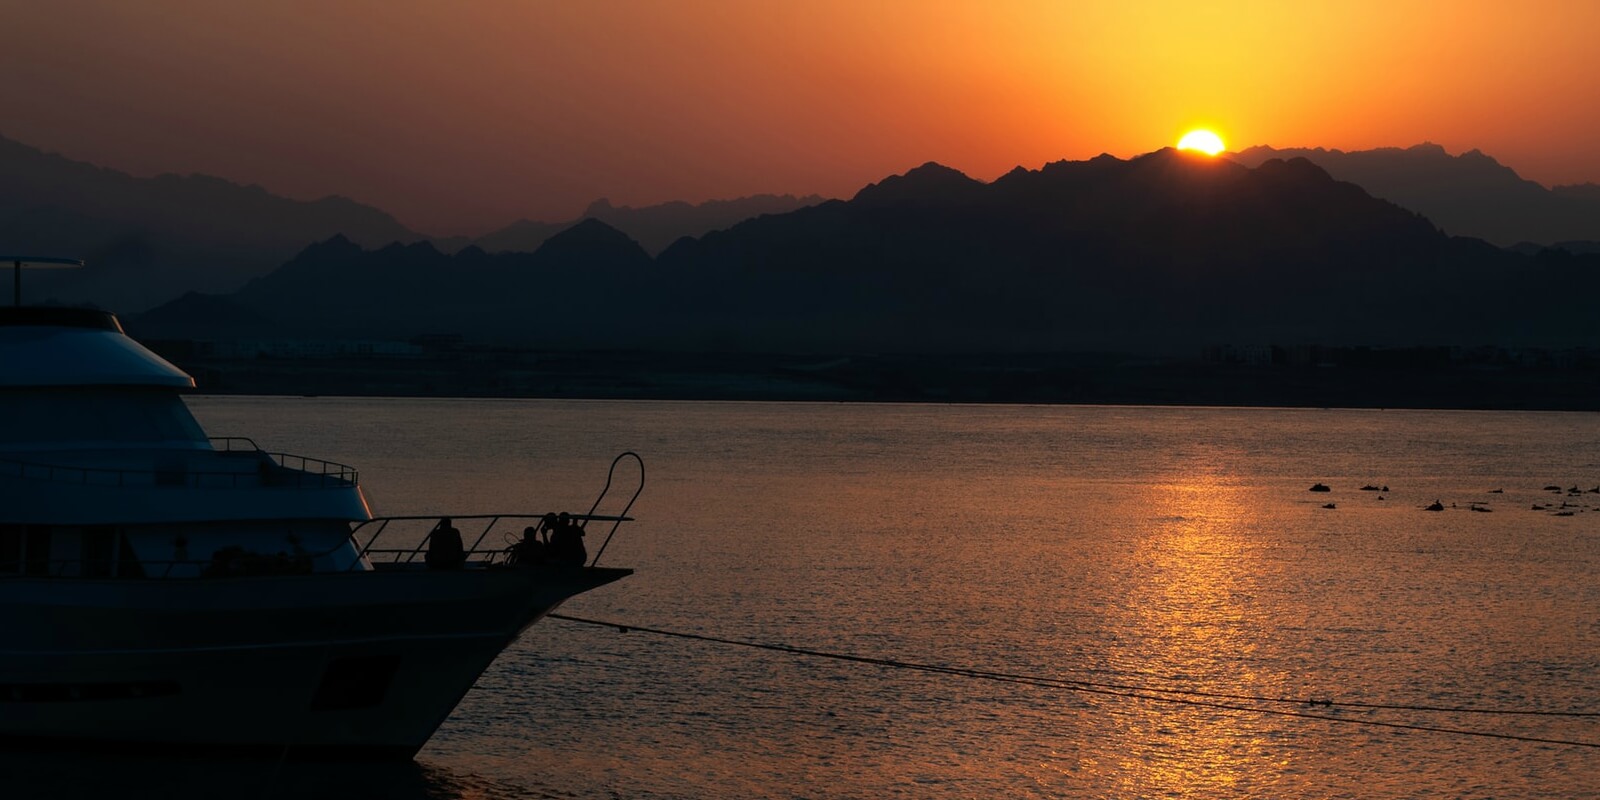 Enjoy the sunset from a Red Sea Resort